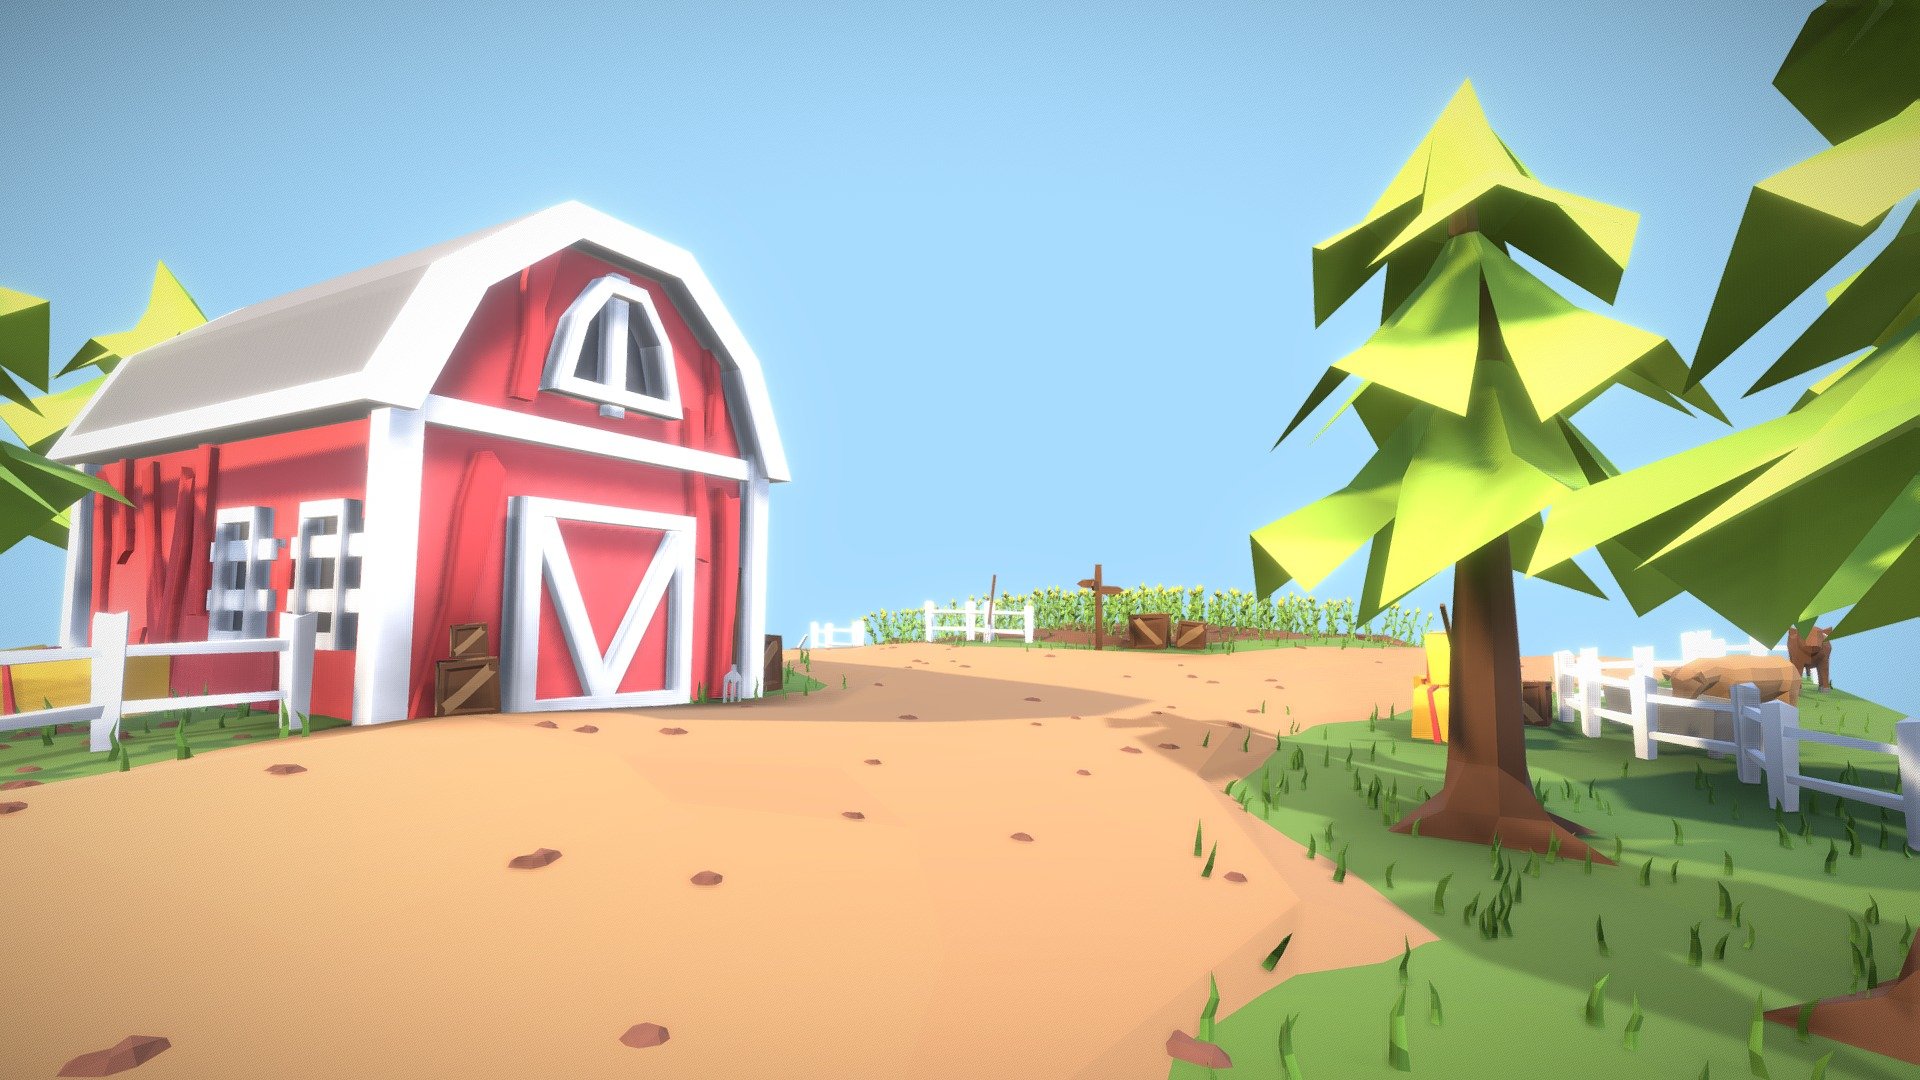 A project for University, to make a low poly style scene only using materials, no textures within 2 weeks. My idea was part of a farm being abducted or pulled out of the ground - Low Poly Abducted Farm Scene - 3D model by Nathan (@nathanday) 3d model